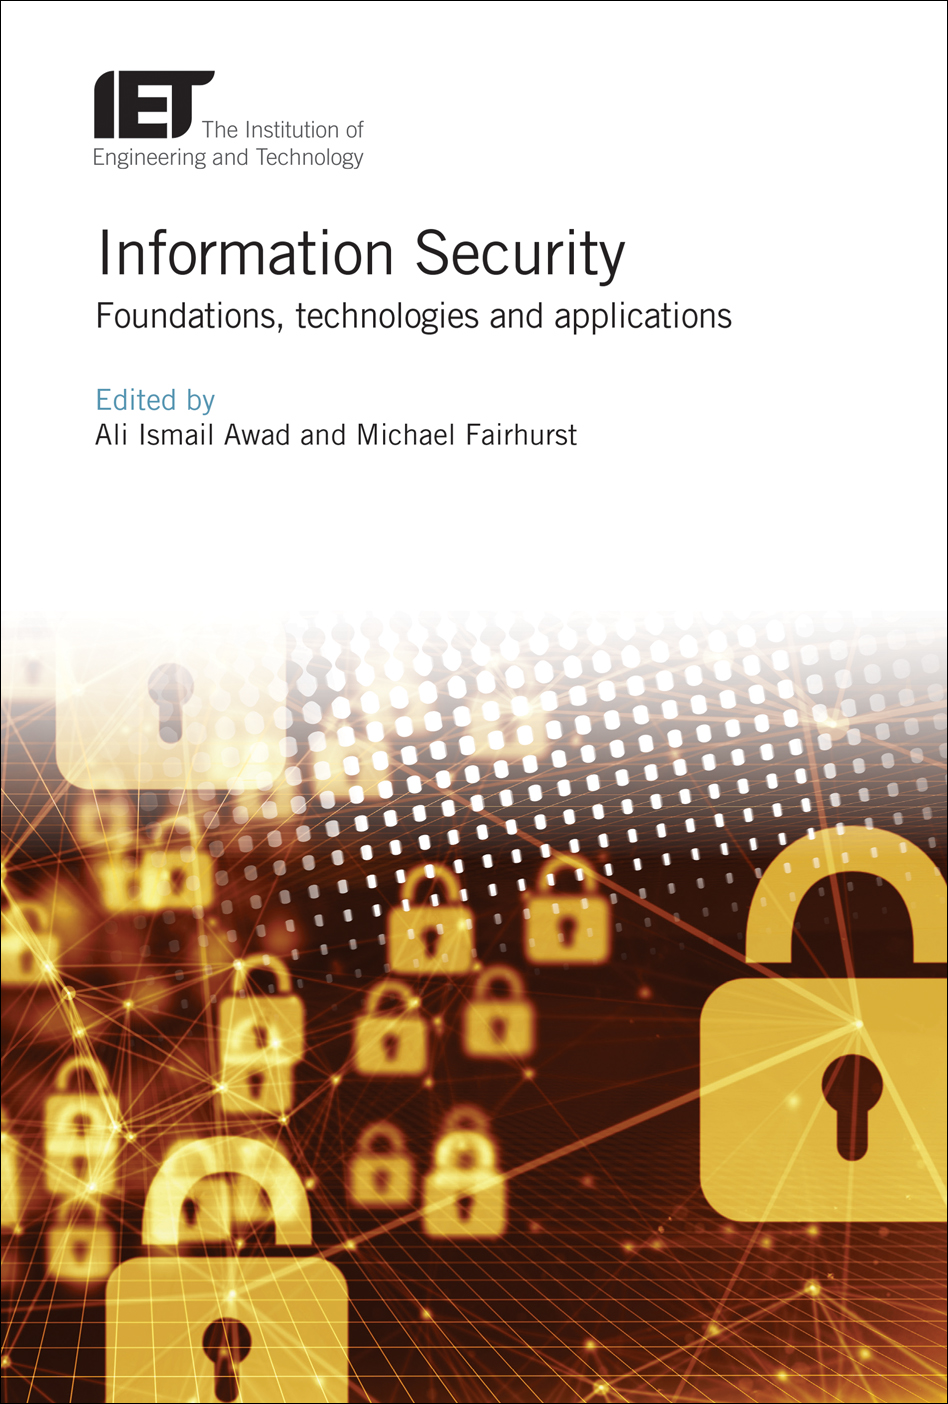 Information Security, Foundations, technologies and applications